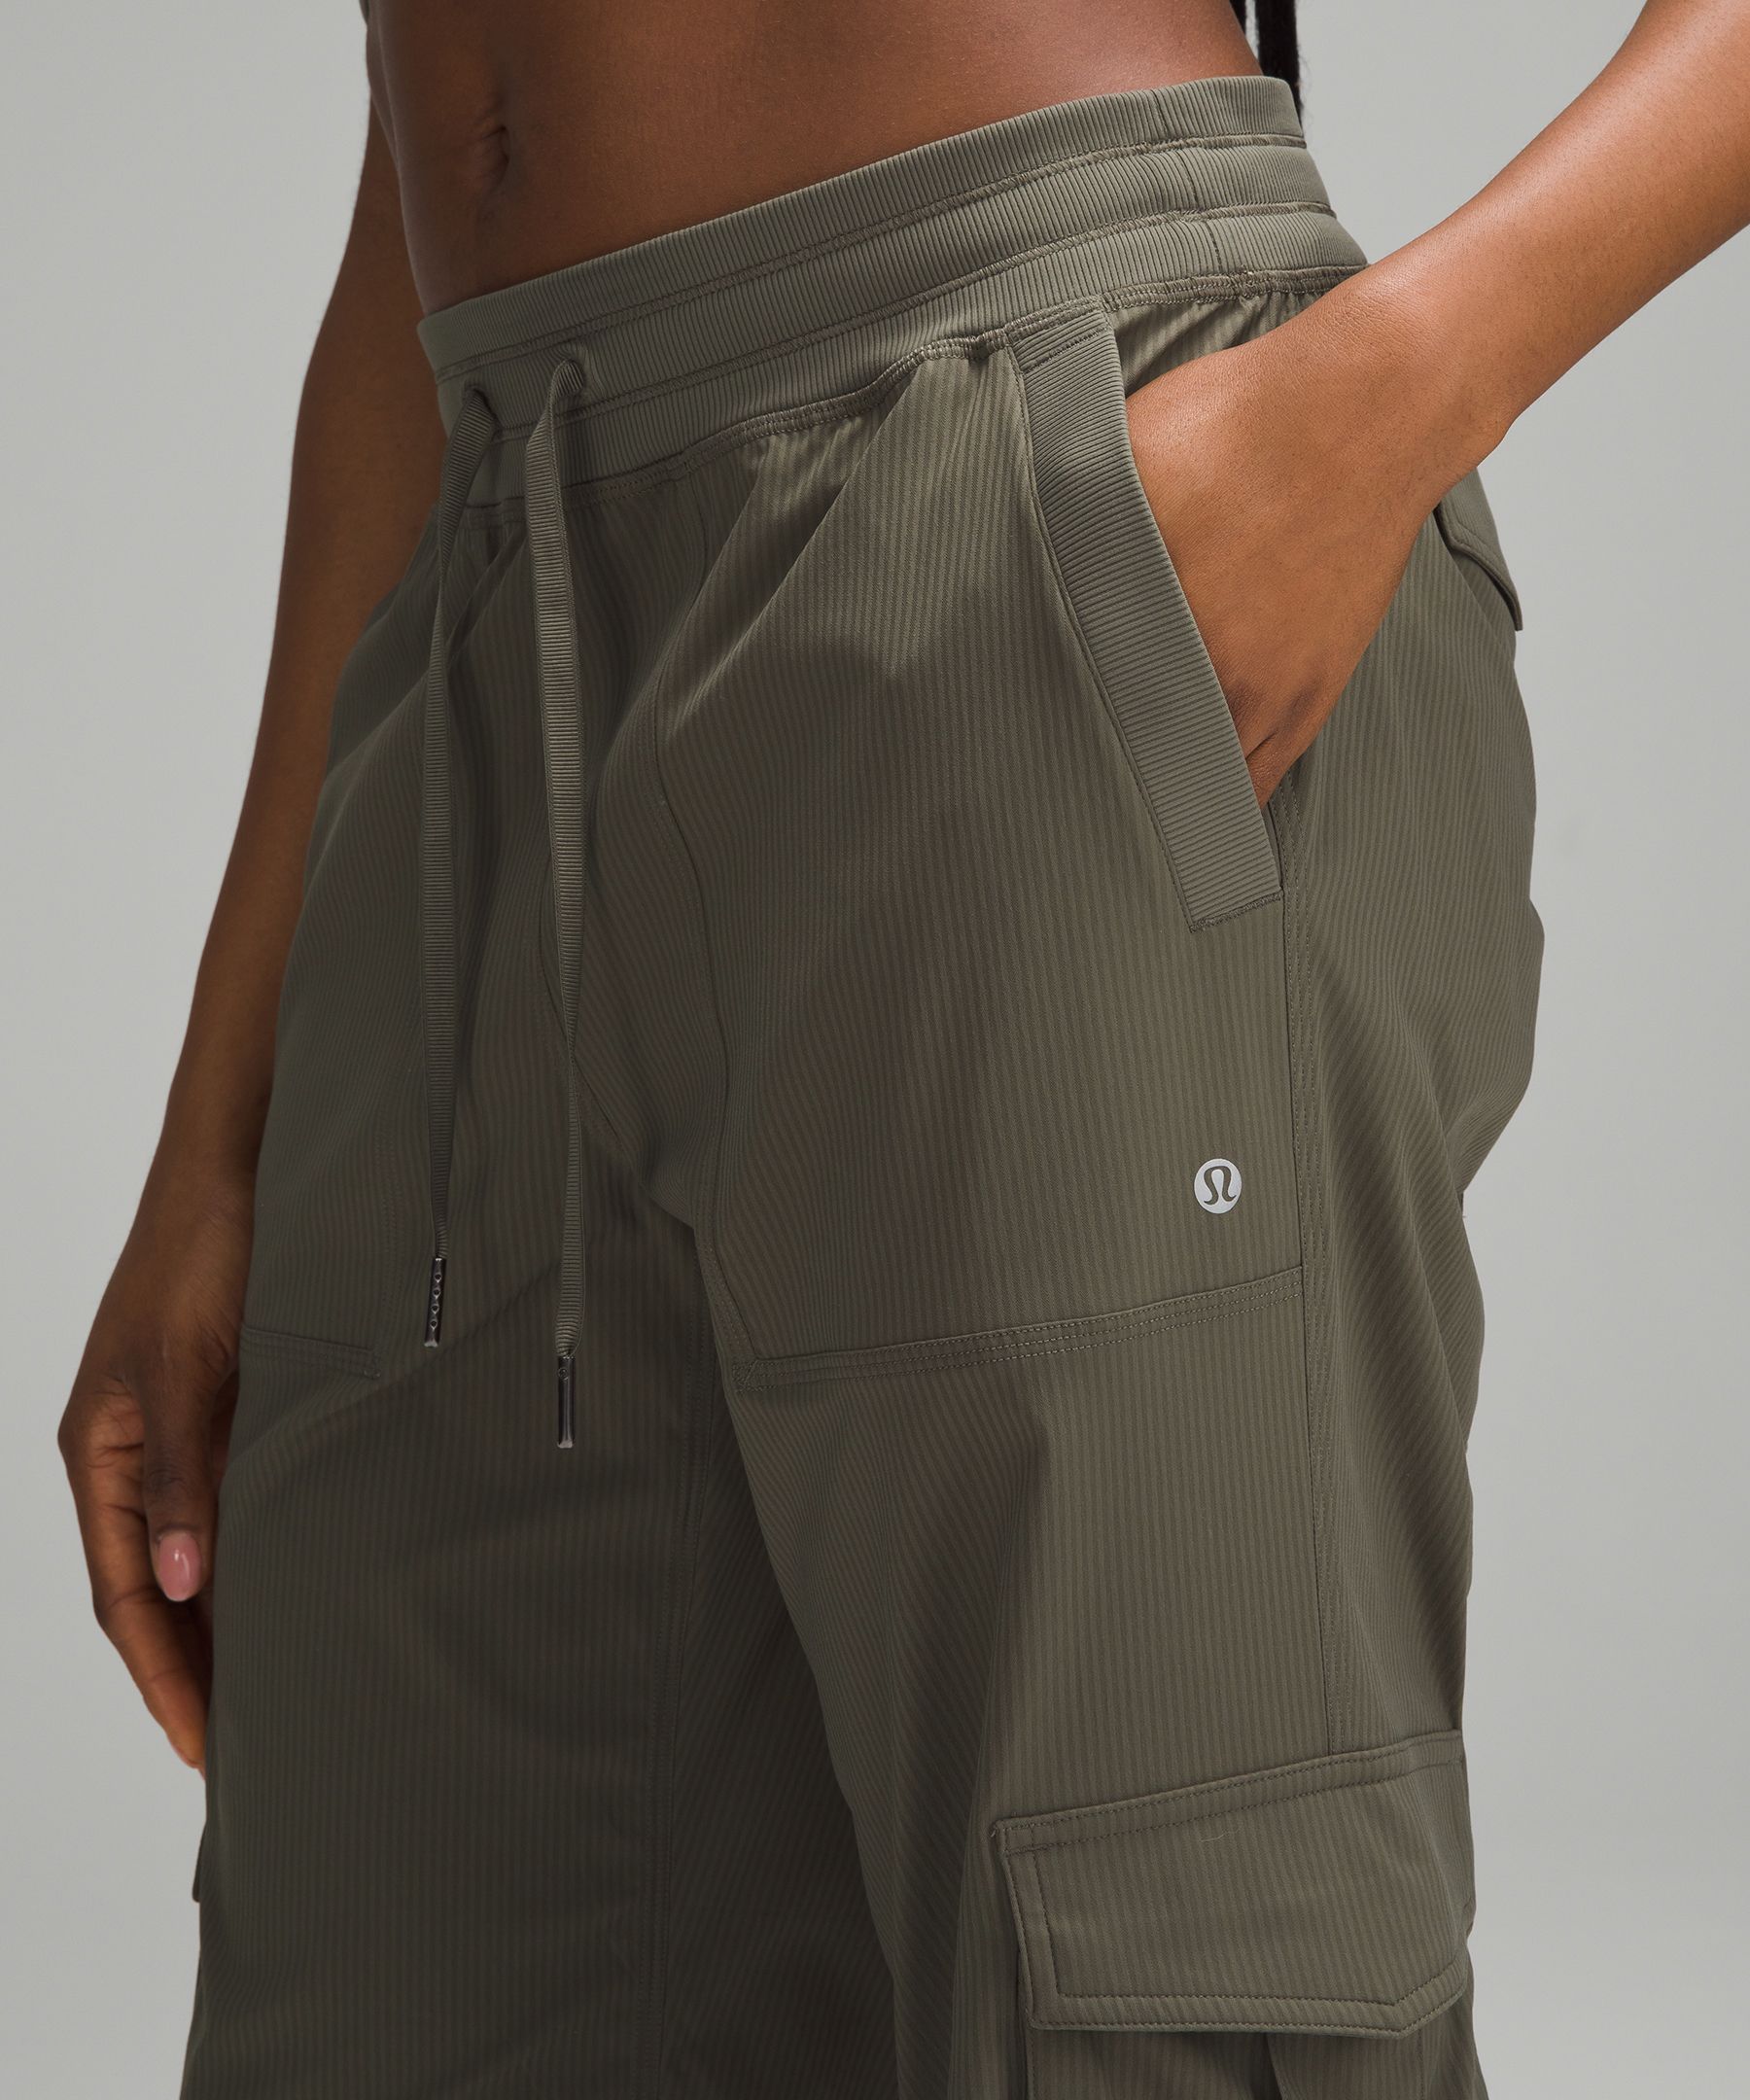 Lululemon athletica Dance Studio Relaxed-Fit Mid-Rise Cargo Pant